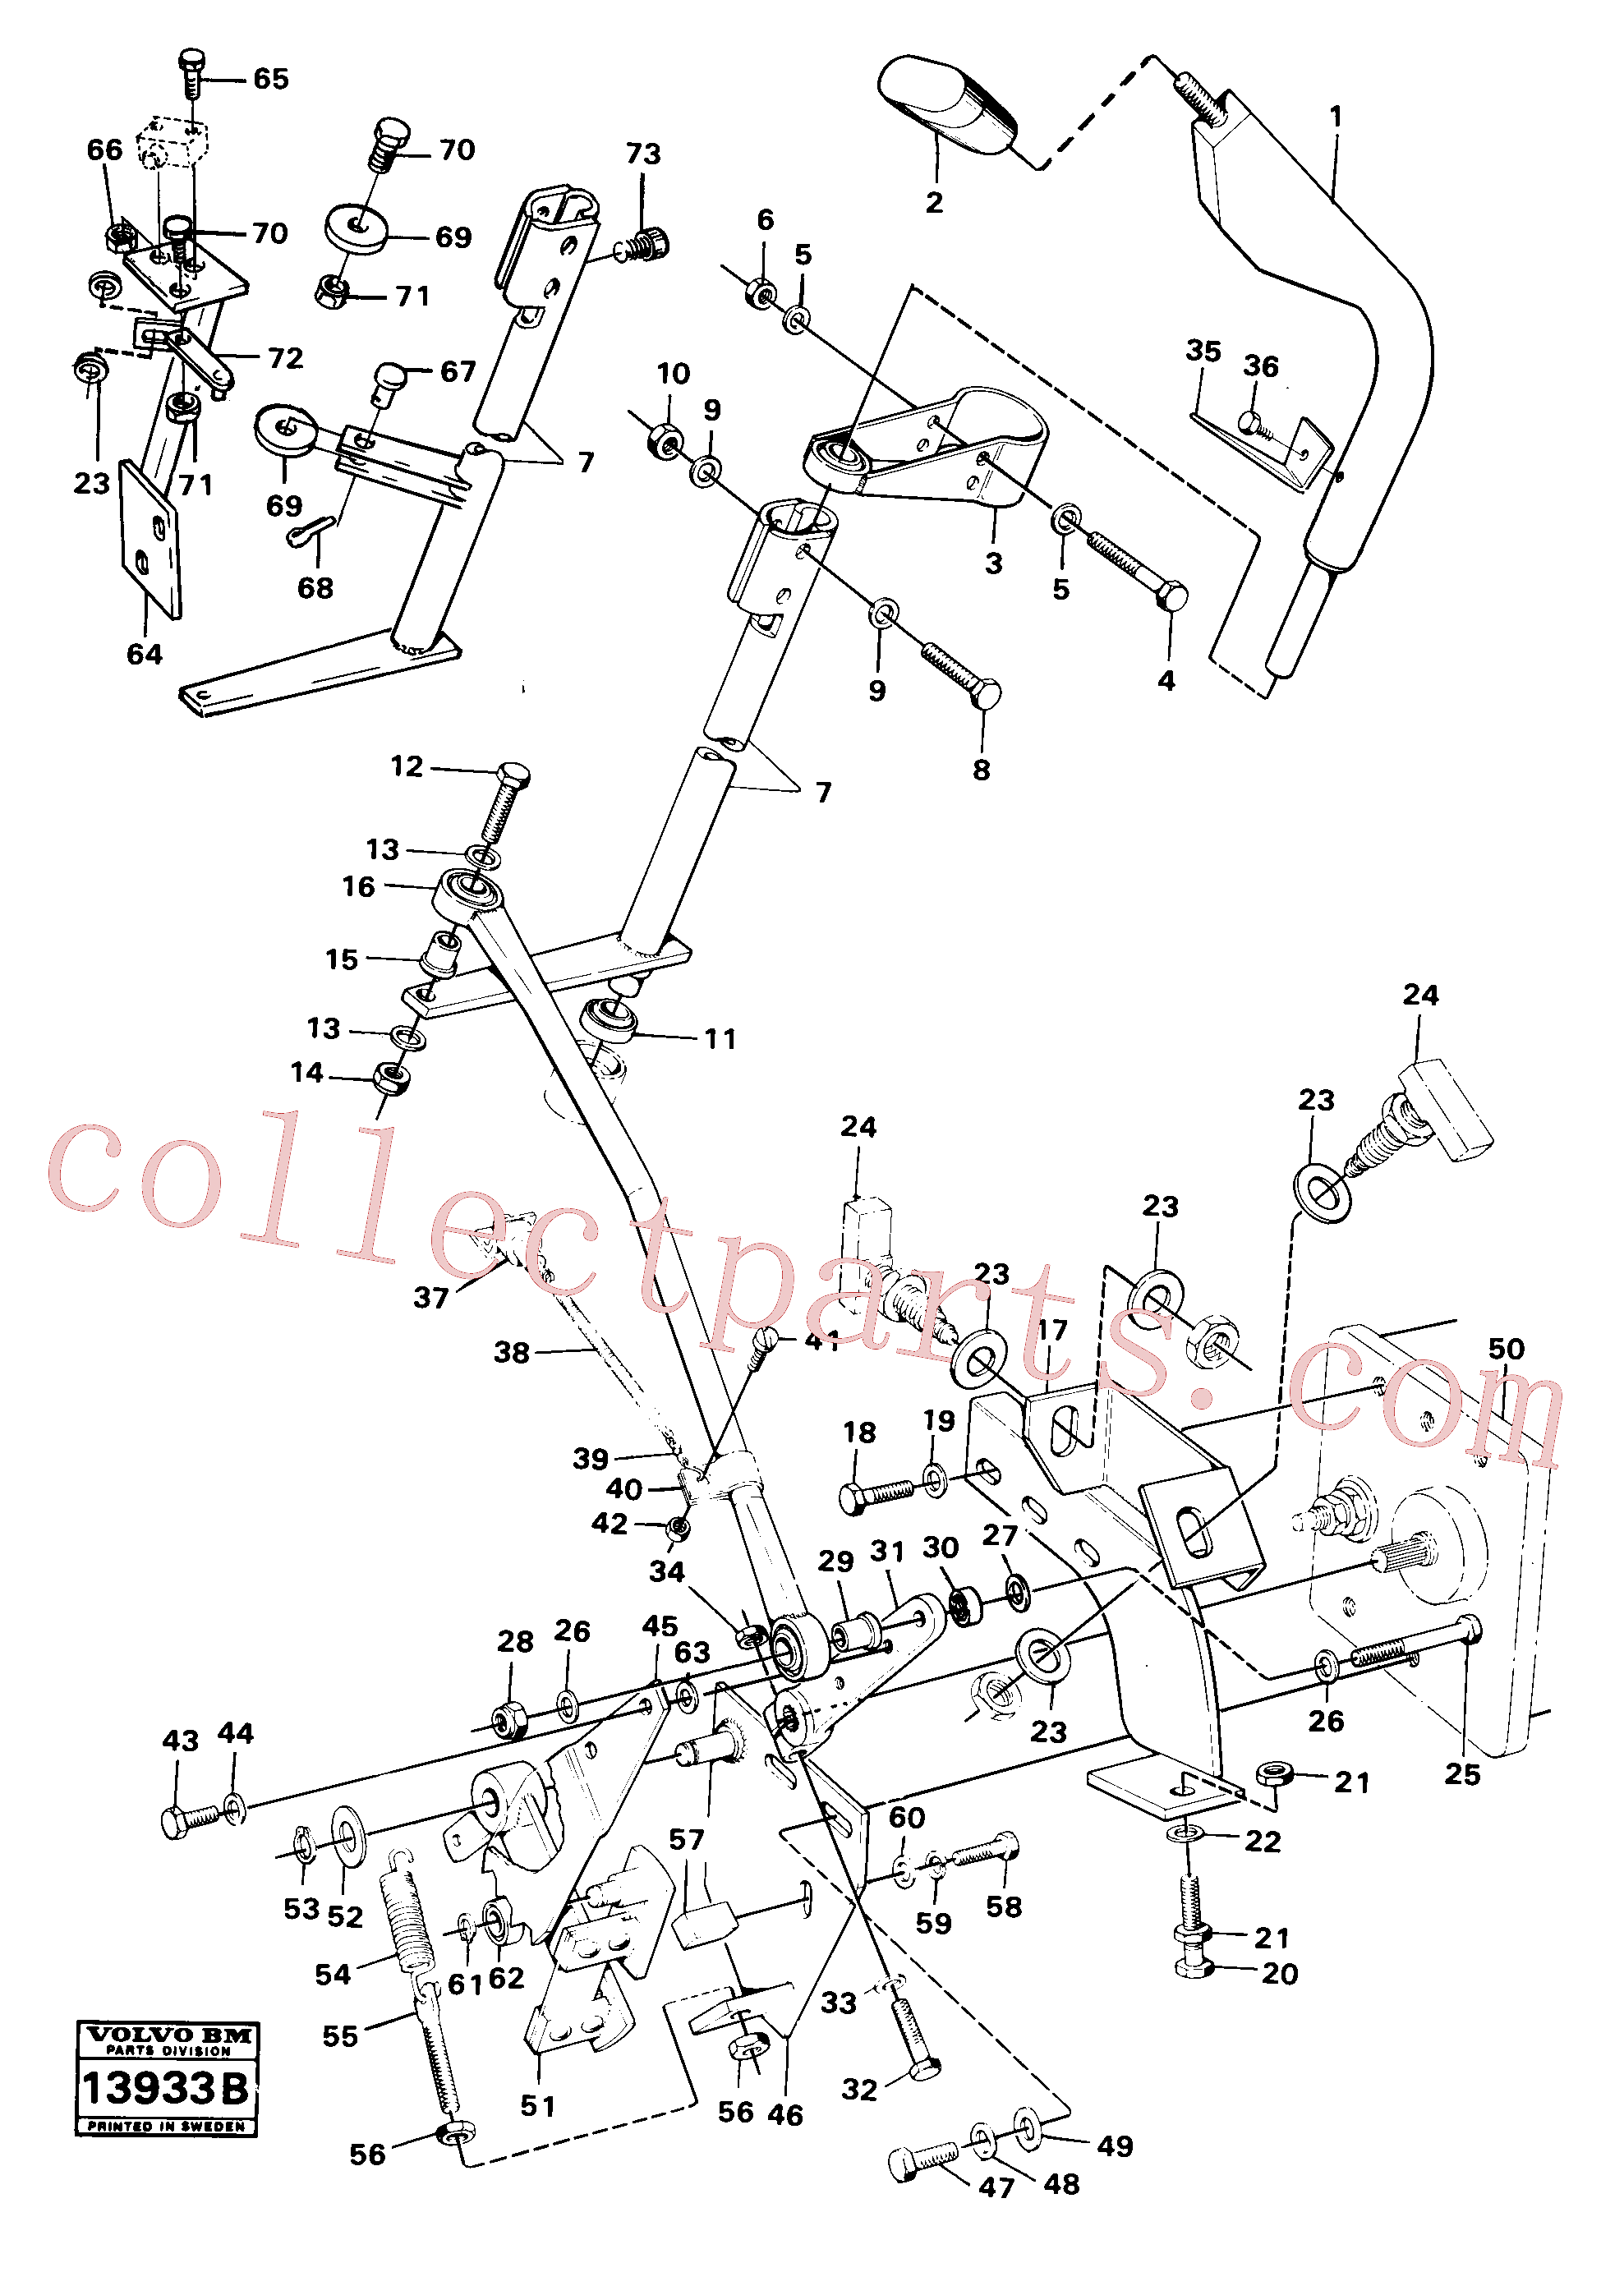 VOE961170 for Volvo Range selector controls(13933B assembly)